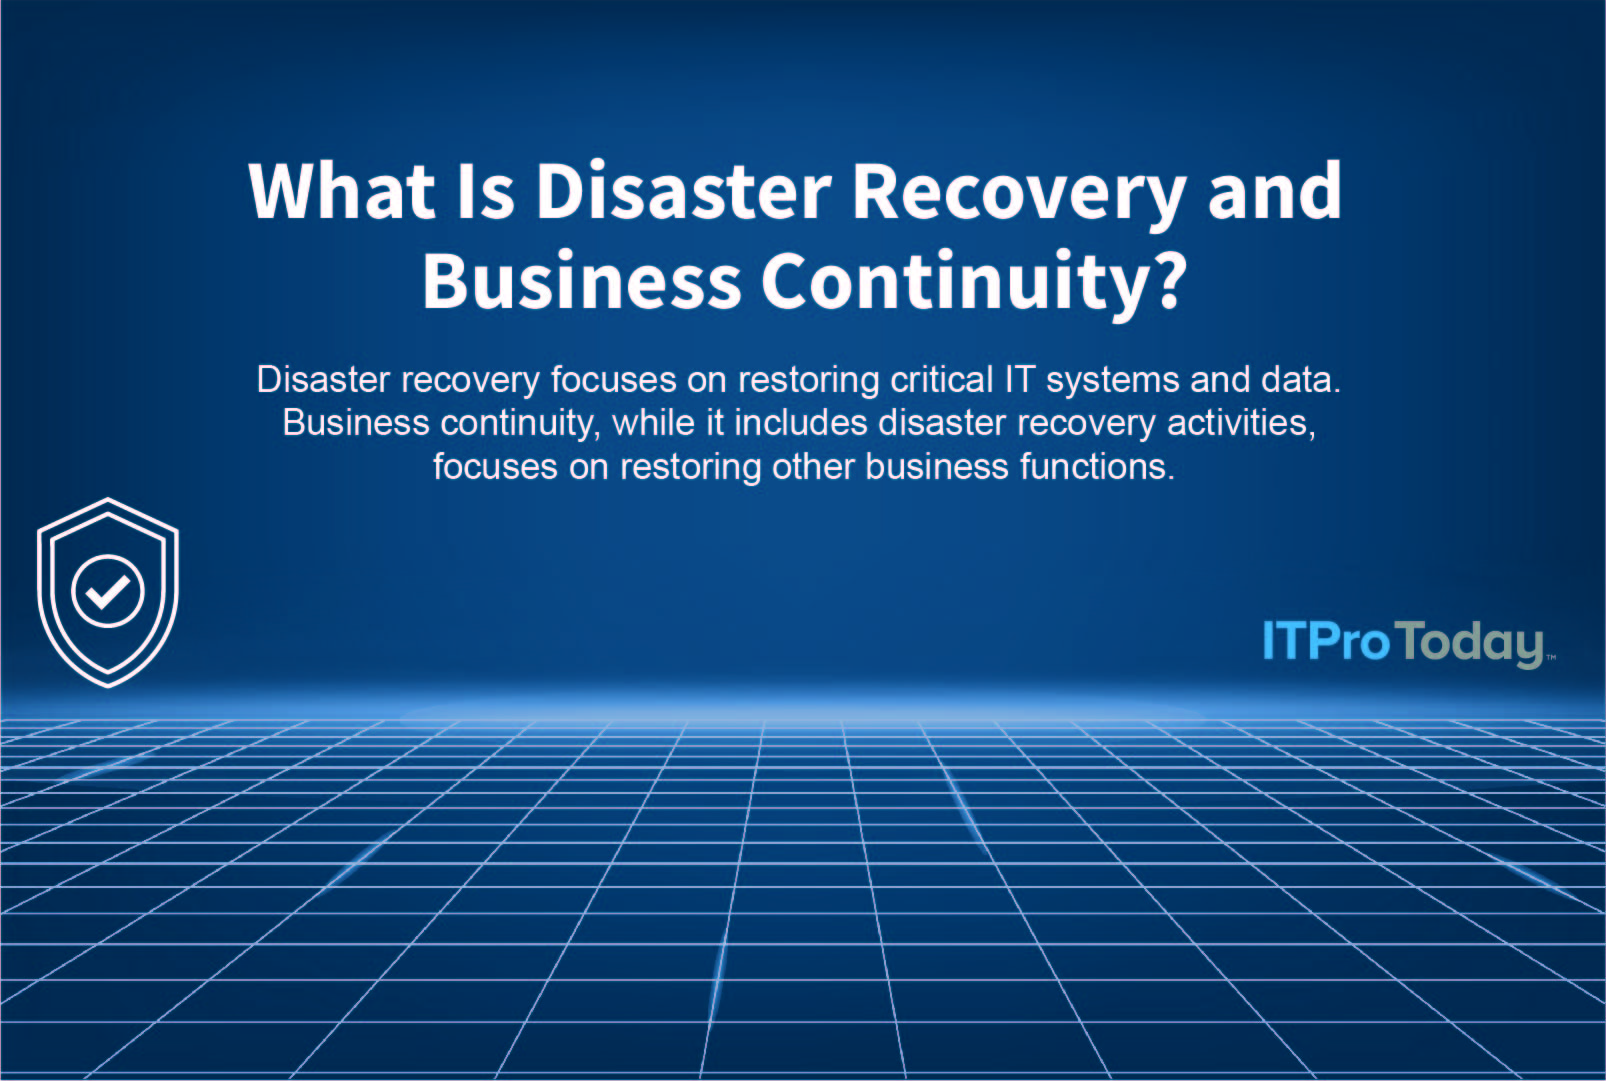 Disaster recovery and business continuity definition provided by ITPro Today